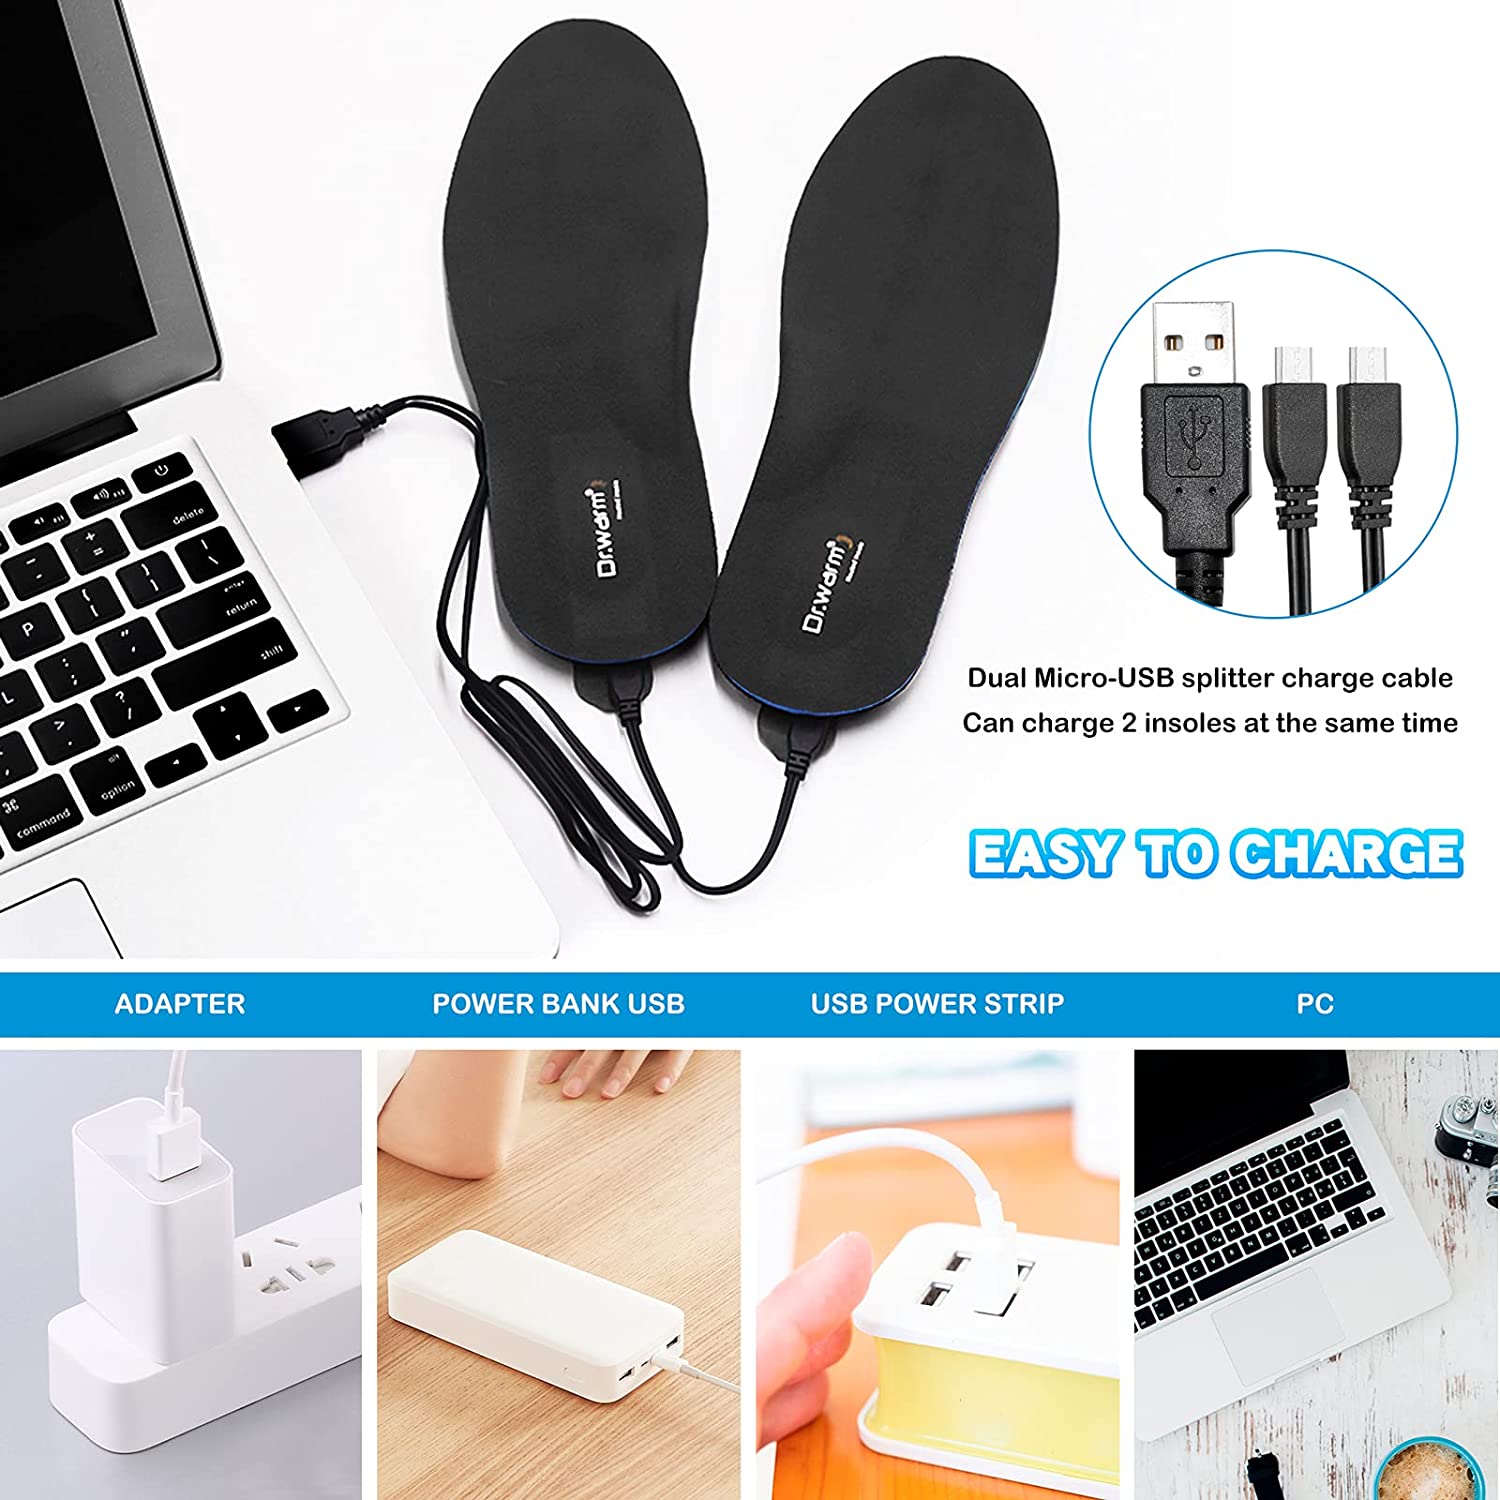 Dr.Warm Lithium-Polymer Battery Heated Insoles